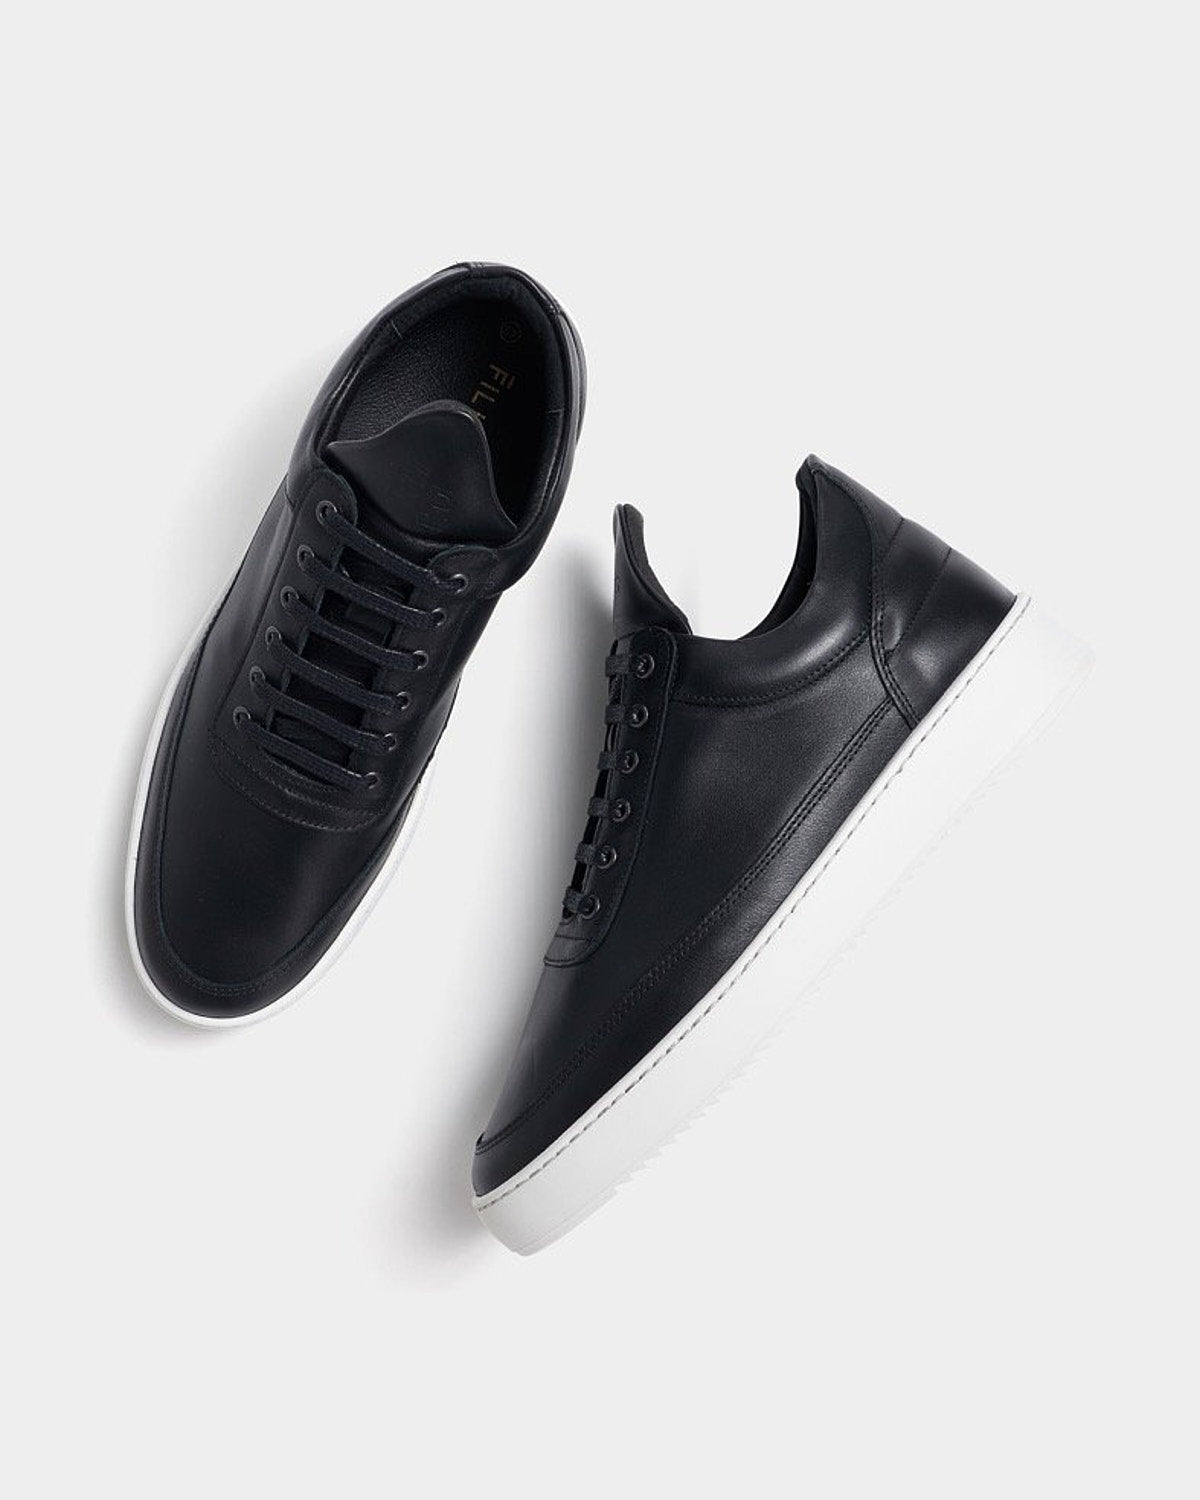 Low Top Ripple Nappa Black - Filling Pieces